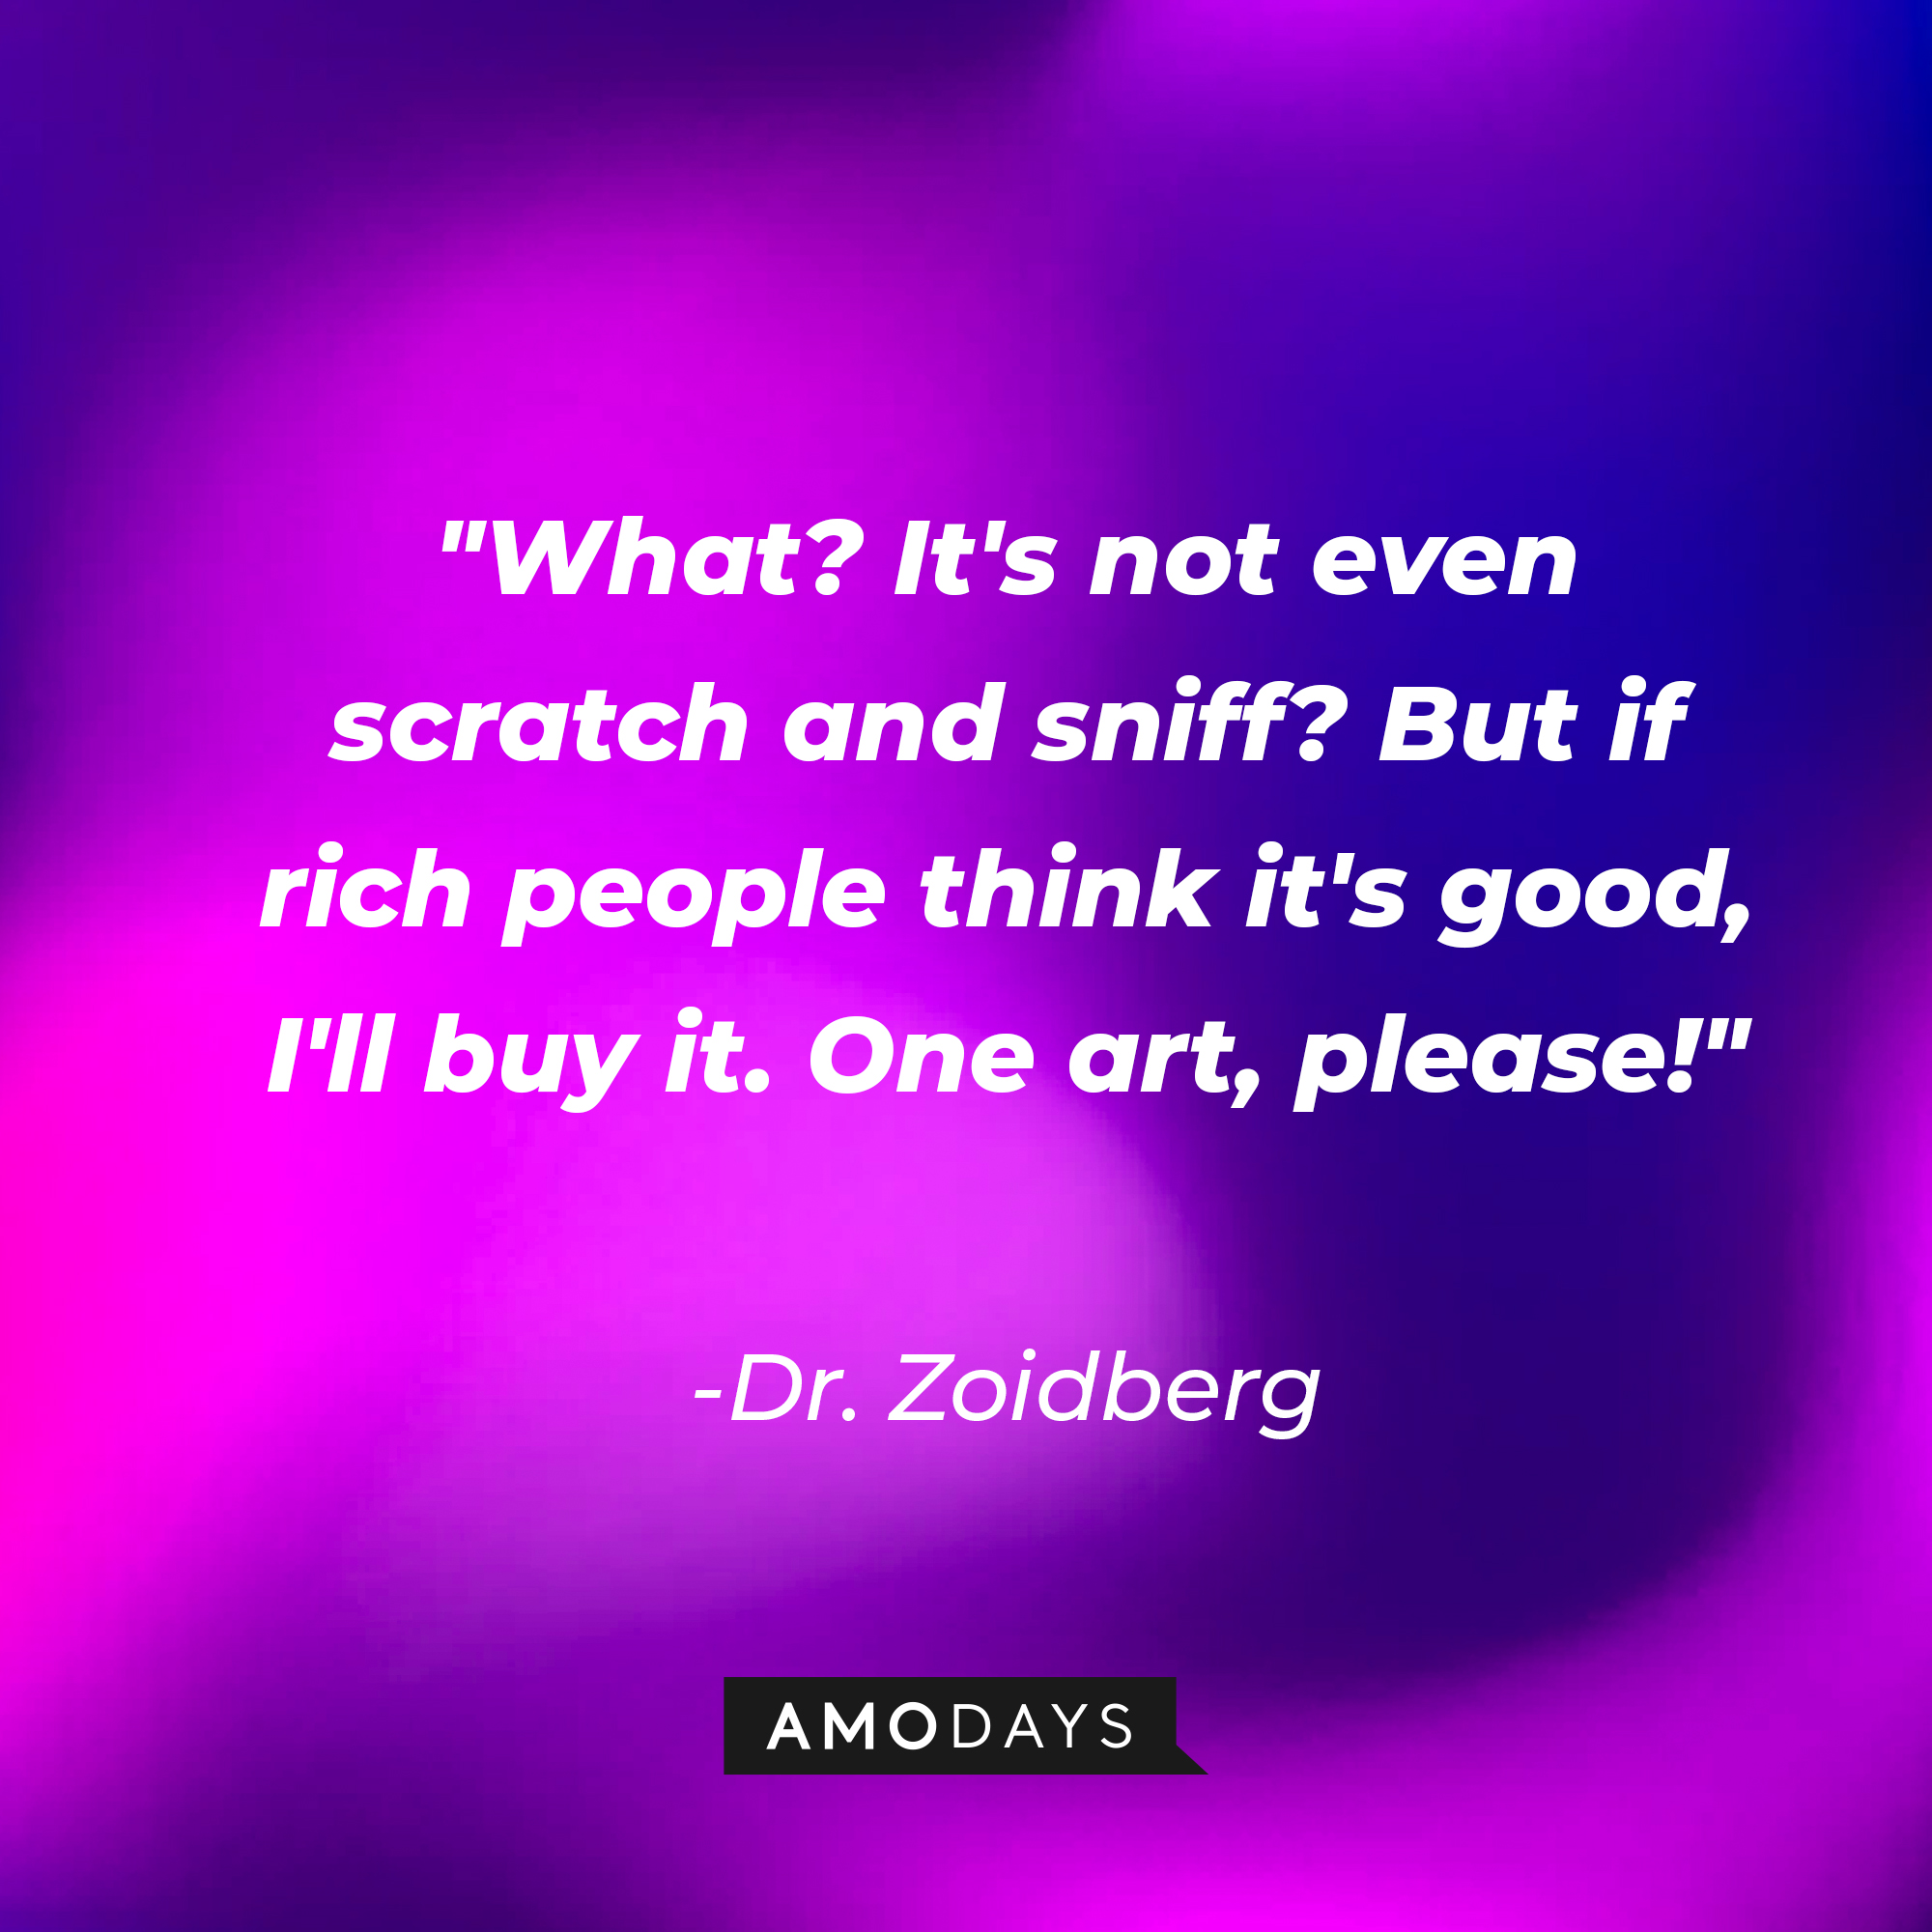 Dr. Zoidberg's quote: "What? It's not even scratch and sniff? But if rich people think it's good, I'll buy it. One art, please!" | Source: AmoDays